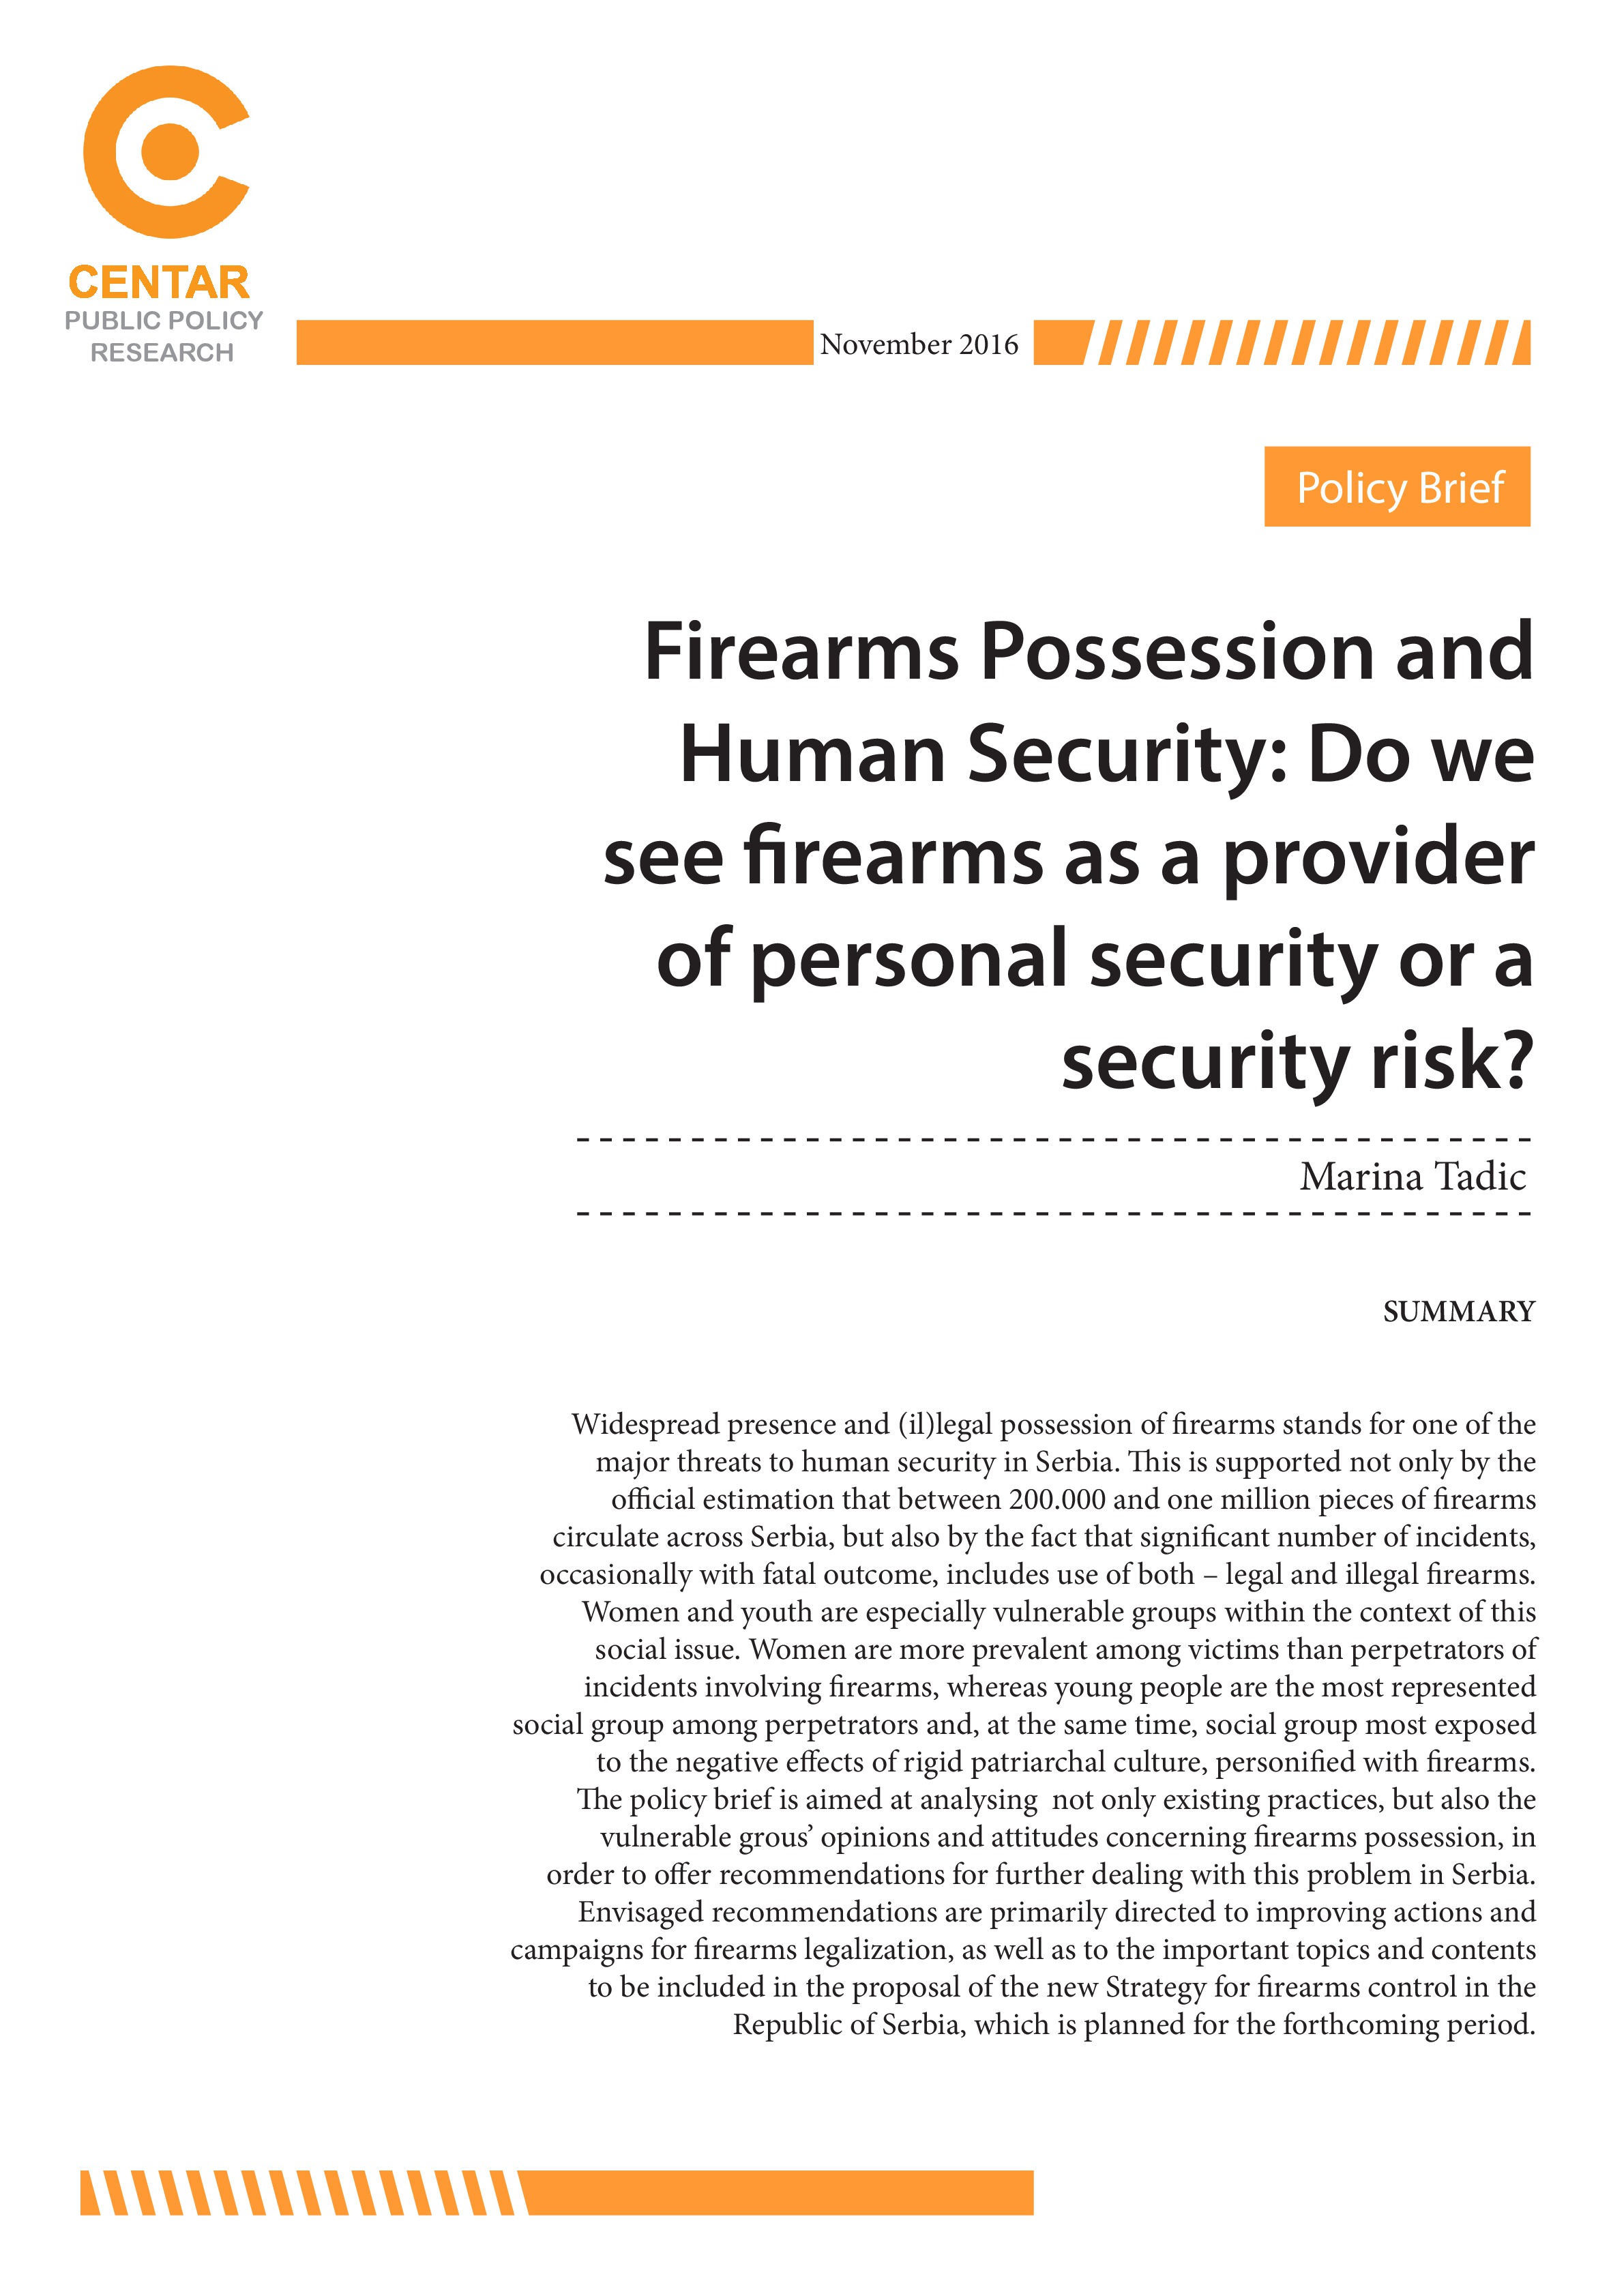 Firearms Possession and Human Security: Do we see firearms as a provider of personal security or a security risk?